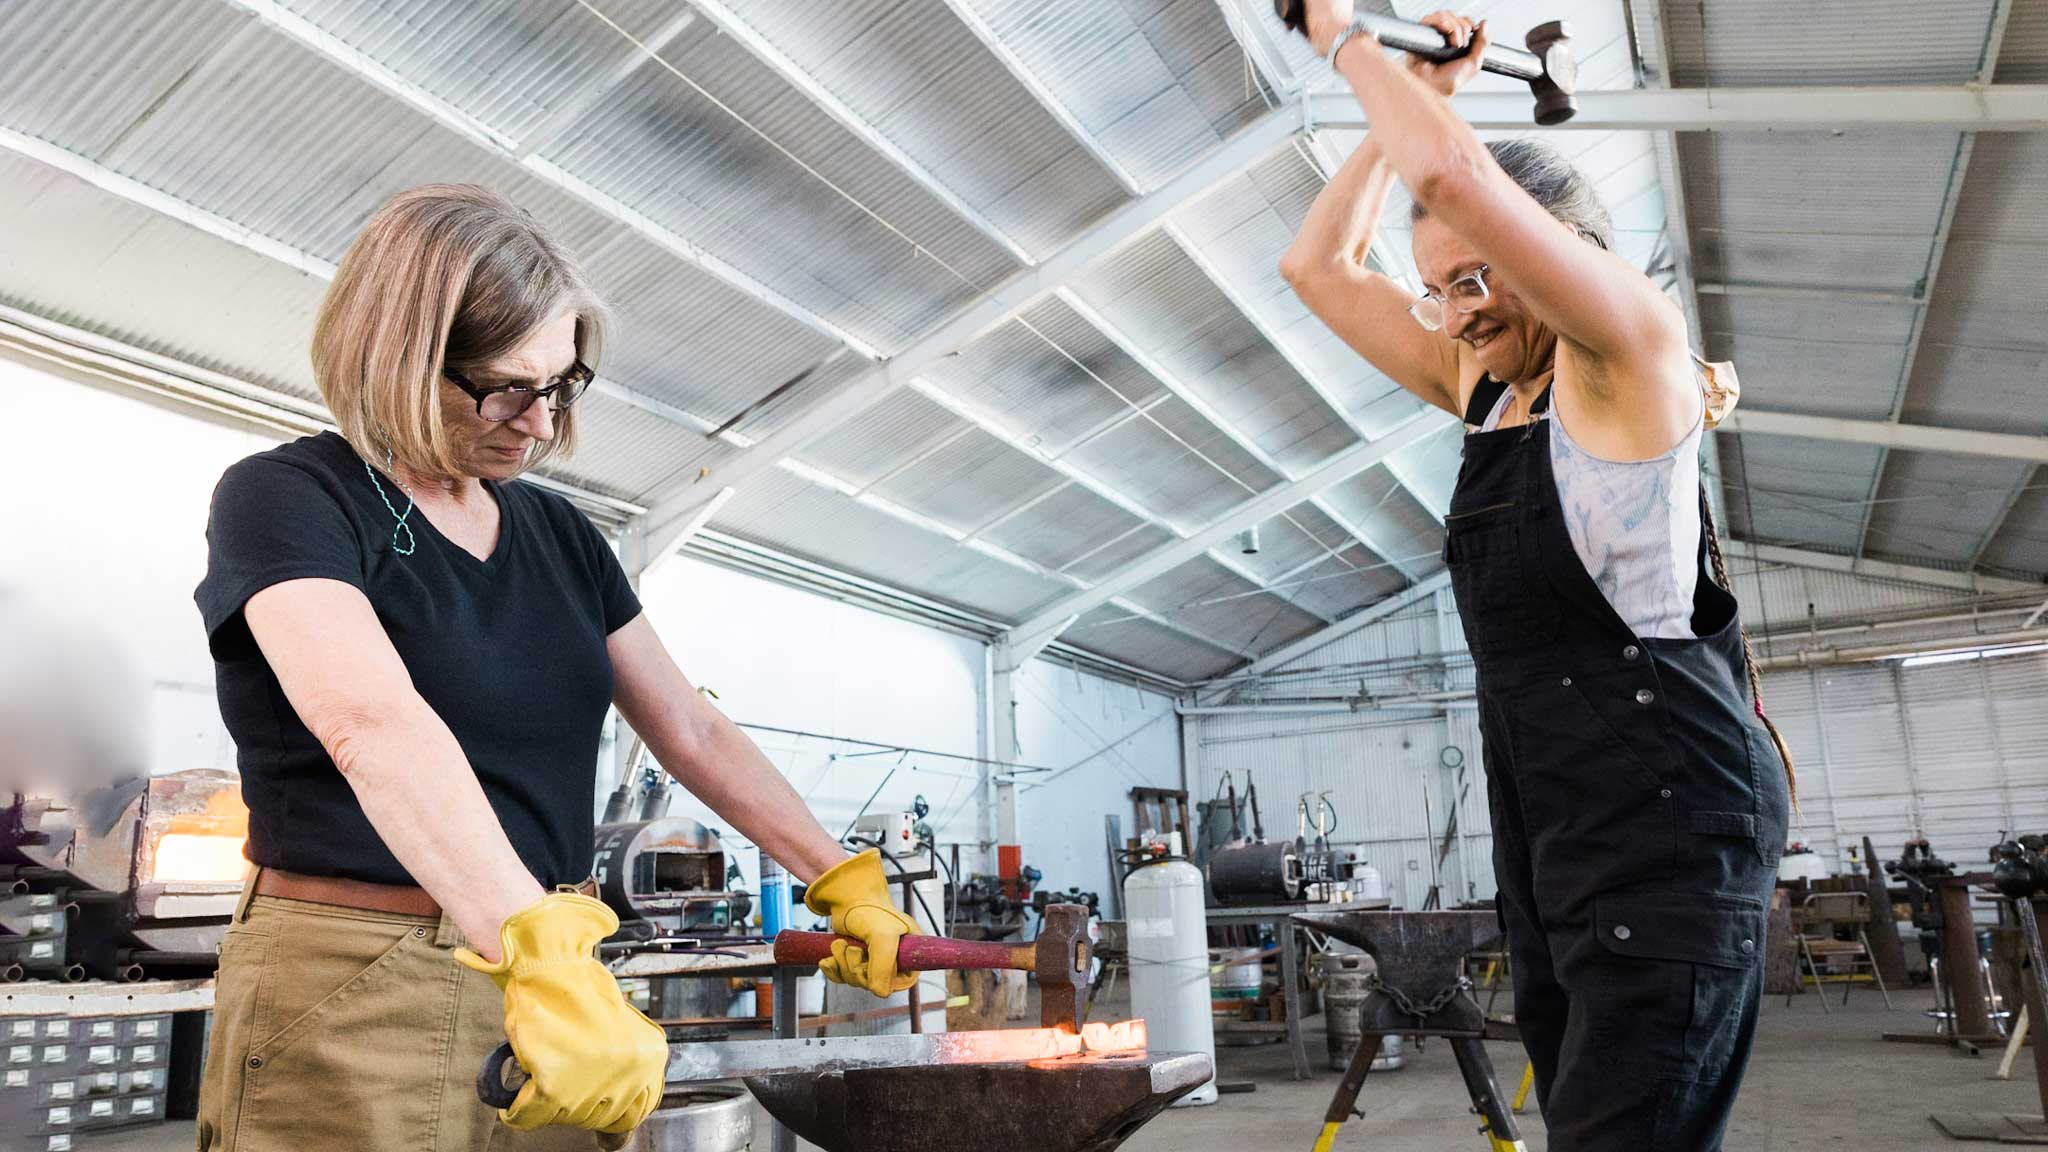 Heather McLarty and Mary Jane Verniere at Adam's Forge demonstrating blacksmithing for the Craft Video Dictionary CVD